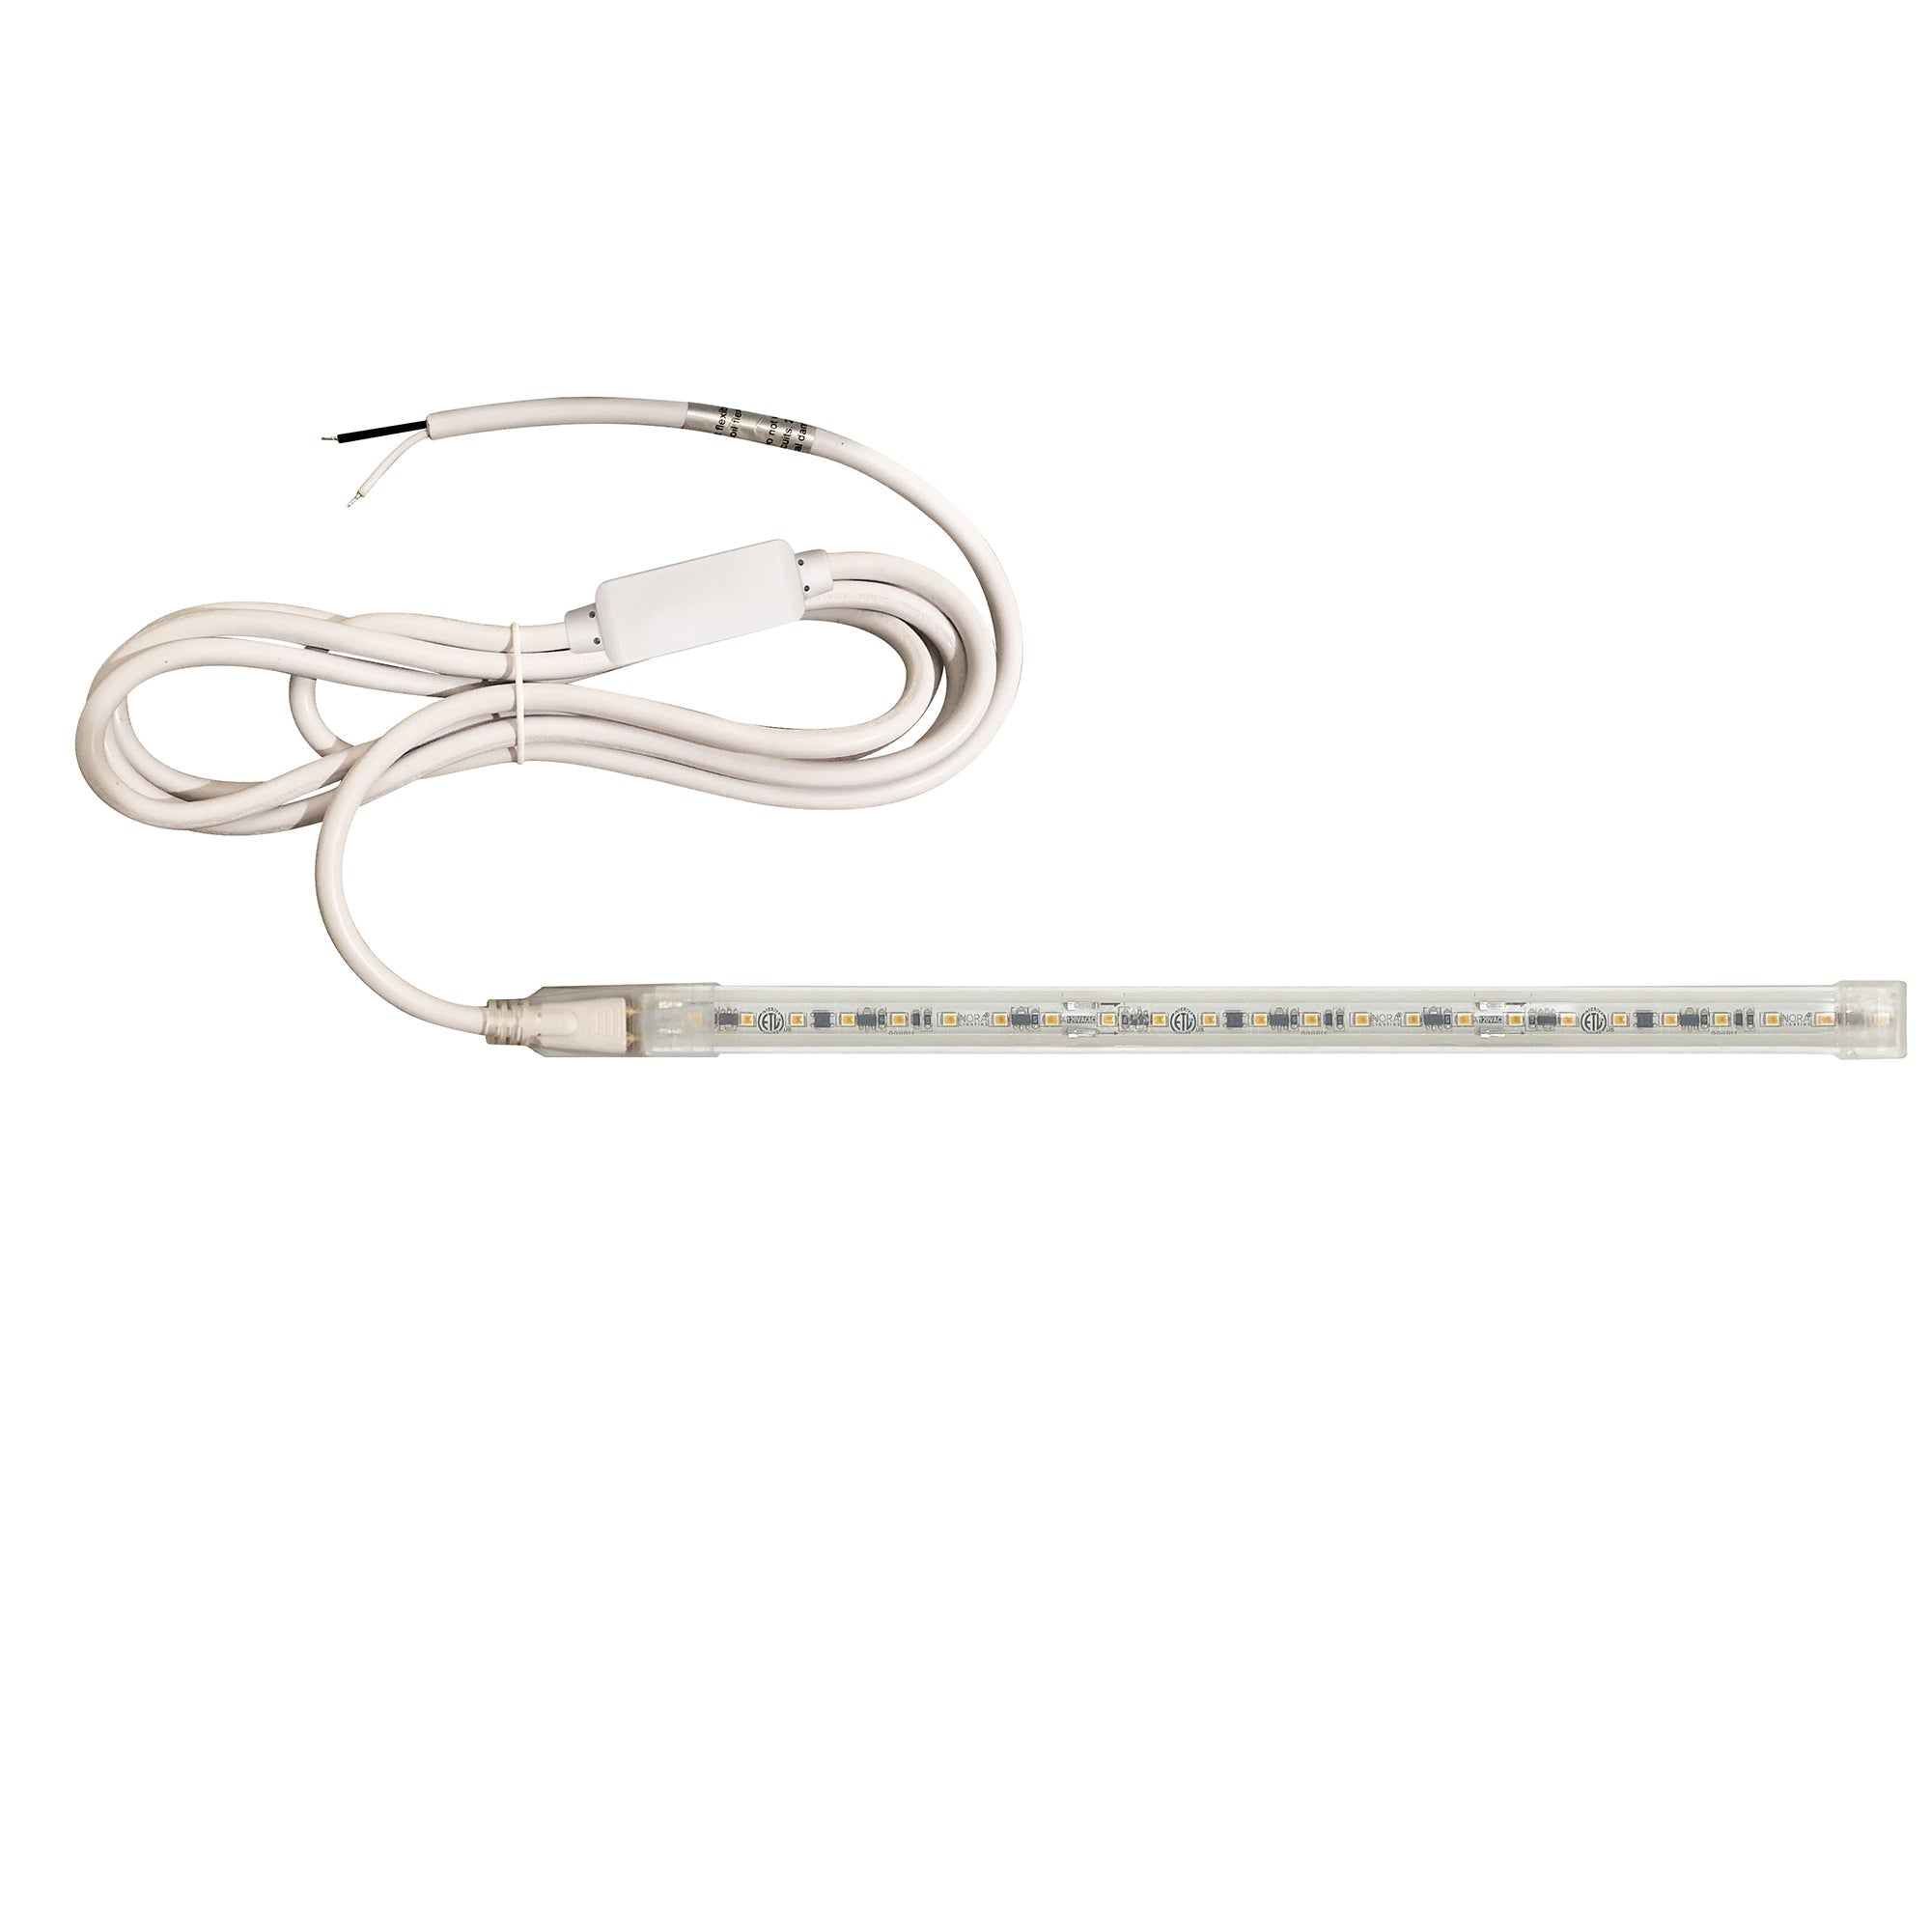 Nora Lighting NUTP13-W6-12-930/HWSP - Accent / Undercabinet - Custom Cut 6-ft 120V Continuous LED Tape Light, 330lm / 3.6W per foot, 3000K, w/ Mounting Clips and 8' Hardwired Power Cord w/ Surge Protector